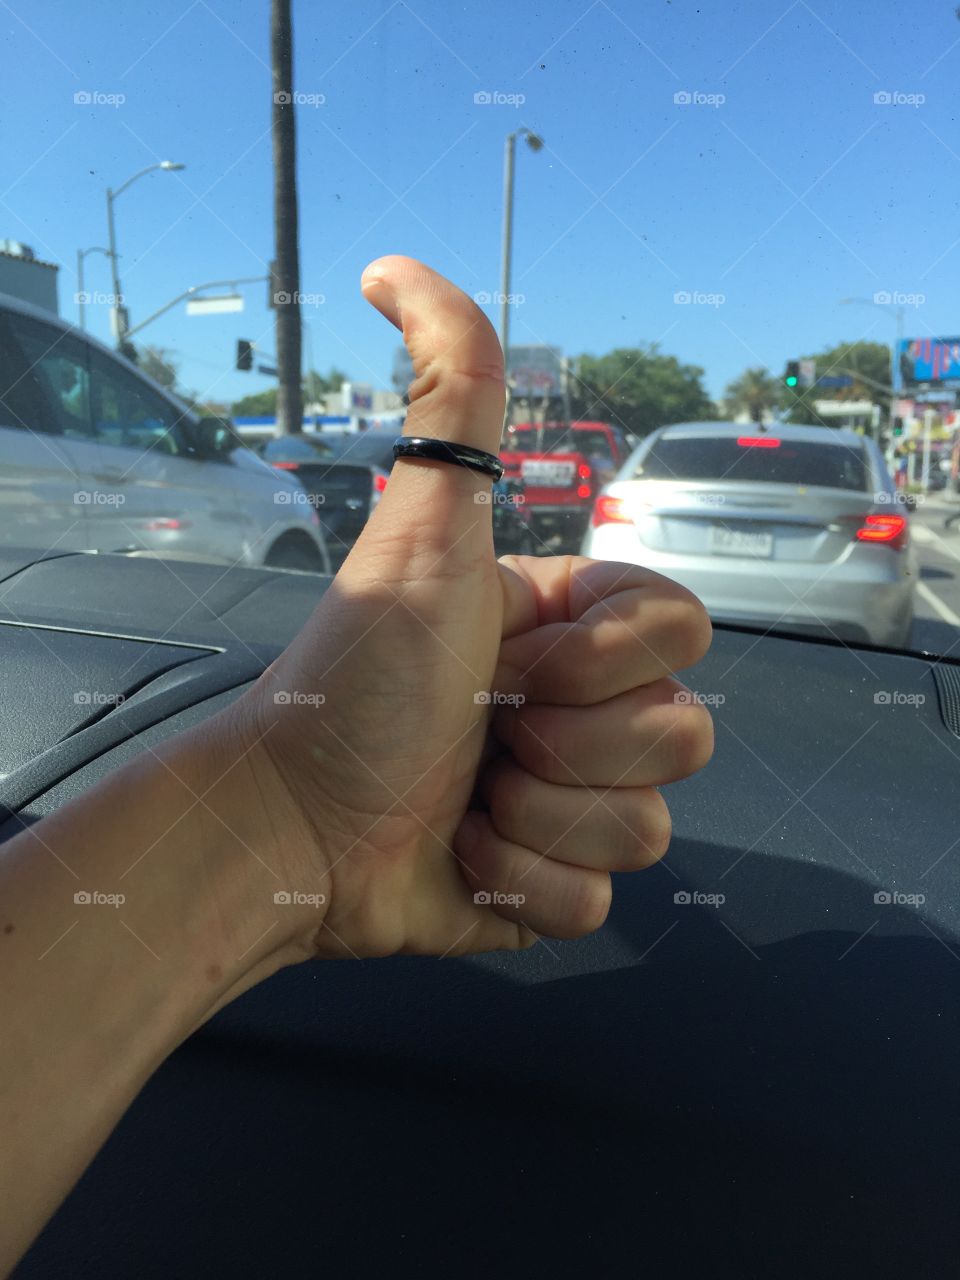 Los Angeles traffic gets a thumbs up 